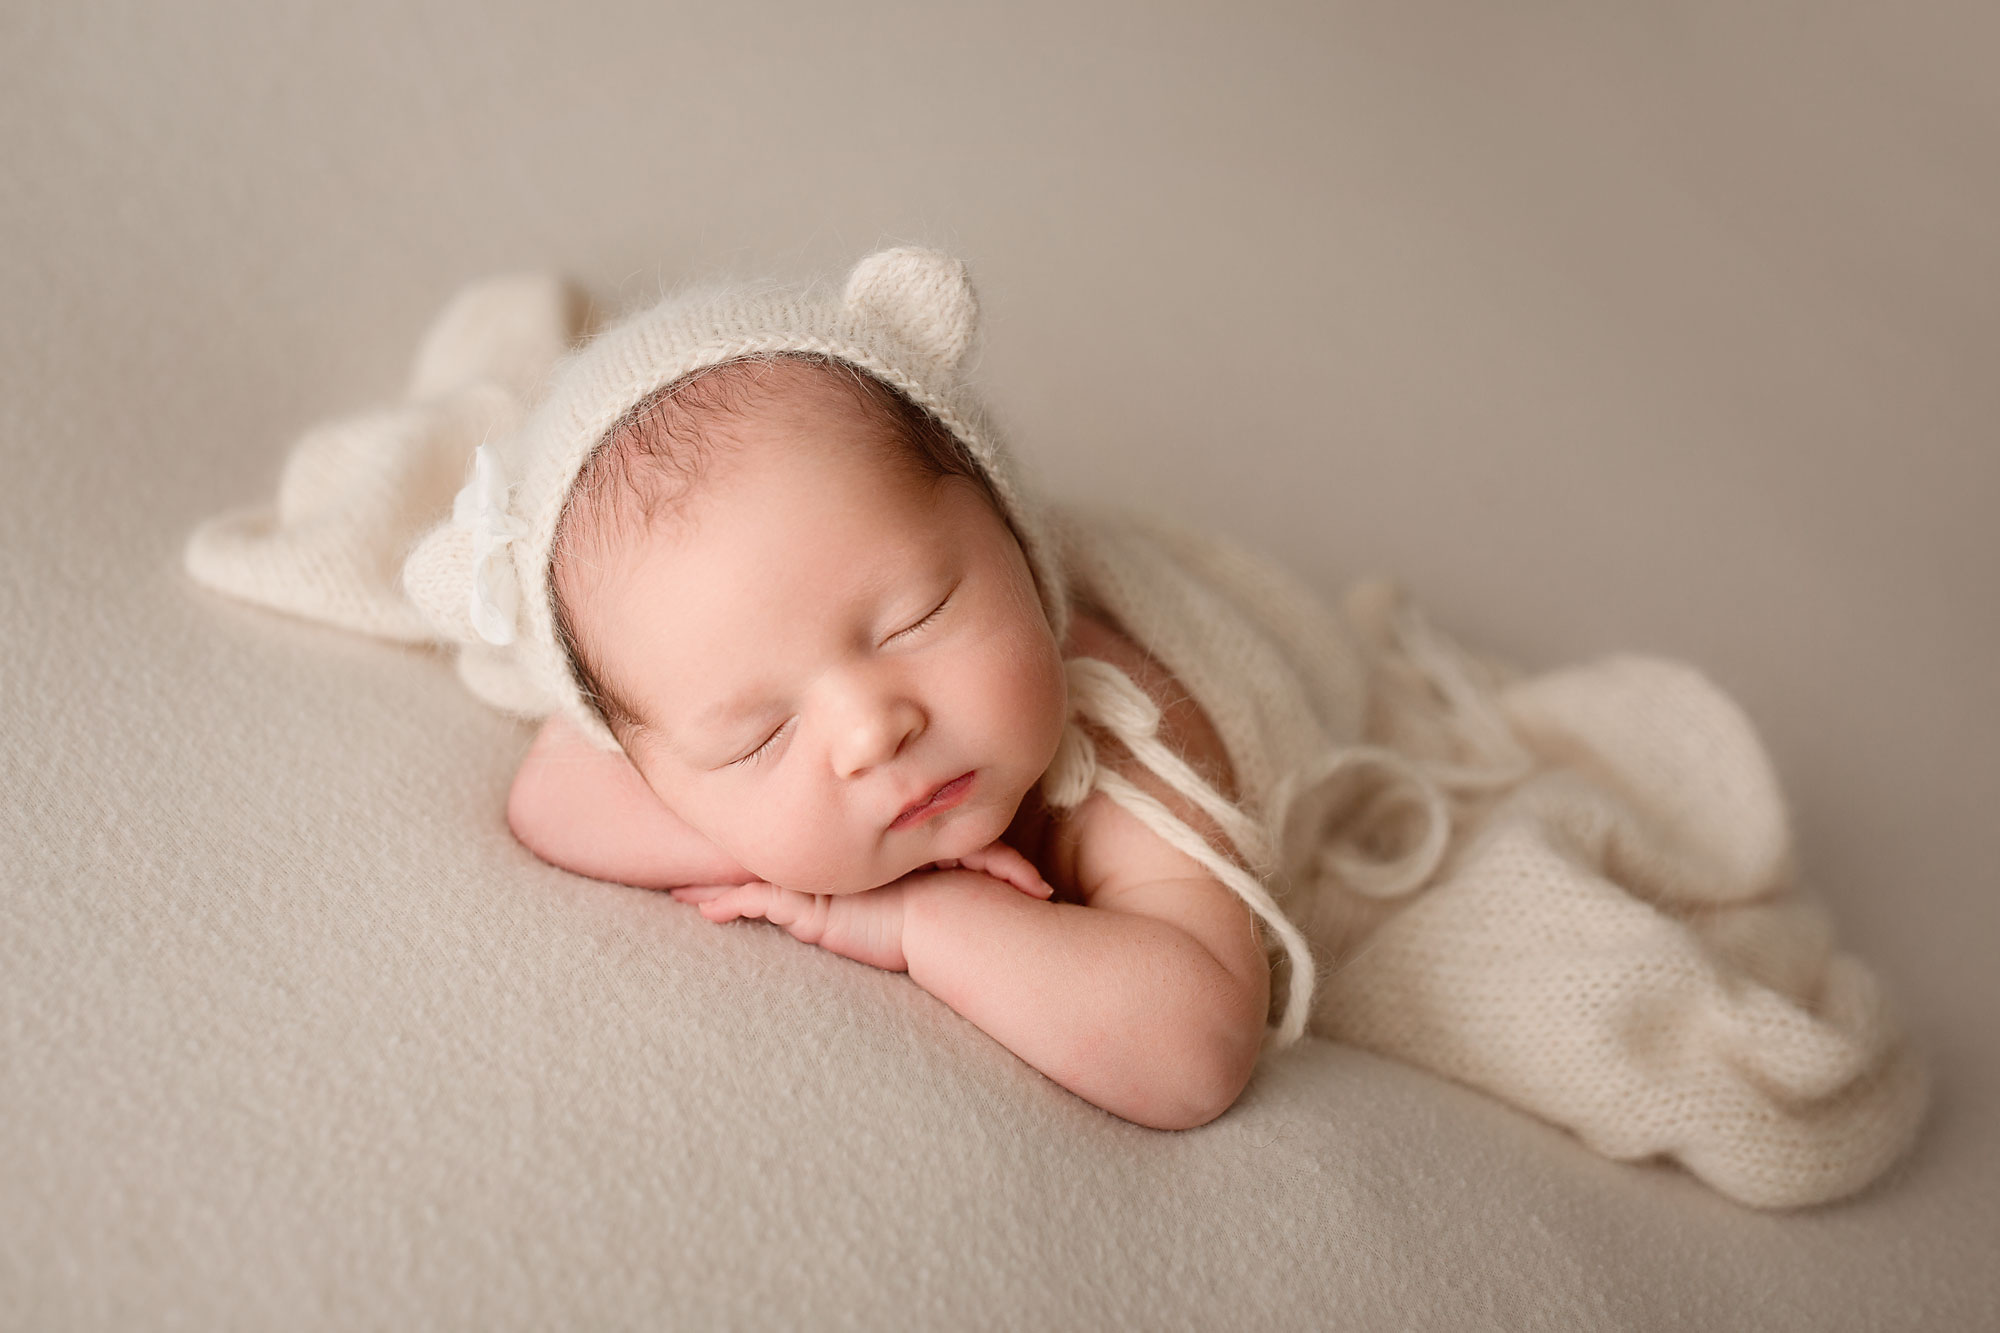 studio newborn photography near me, sleeping baby wearing knit white bear cap and wrapped in white blanket